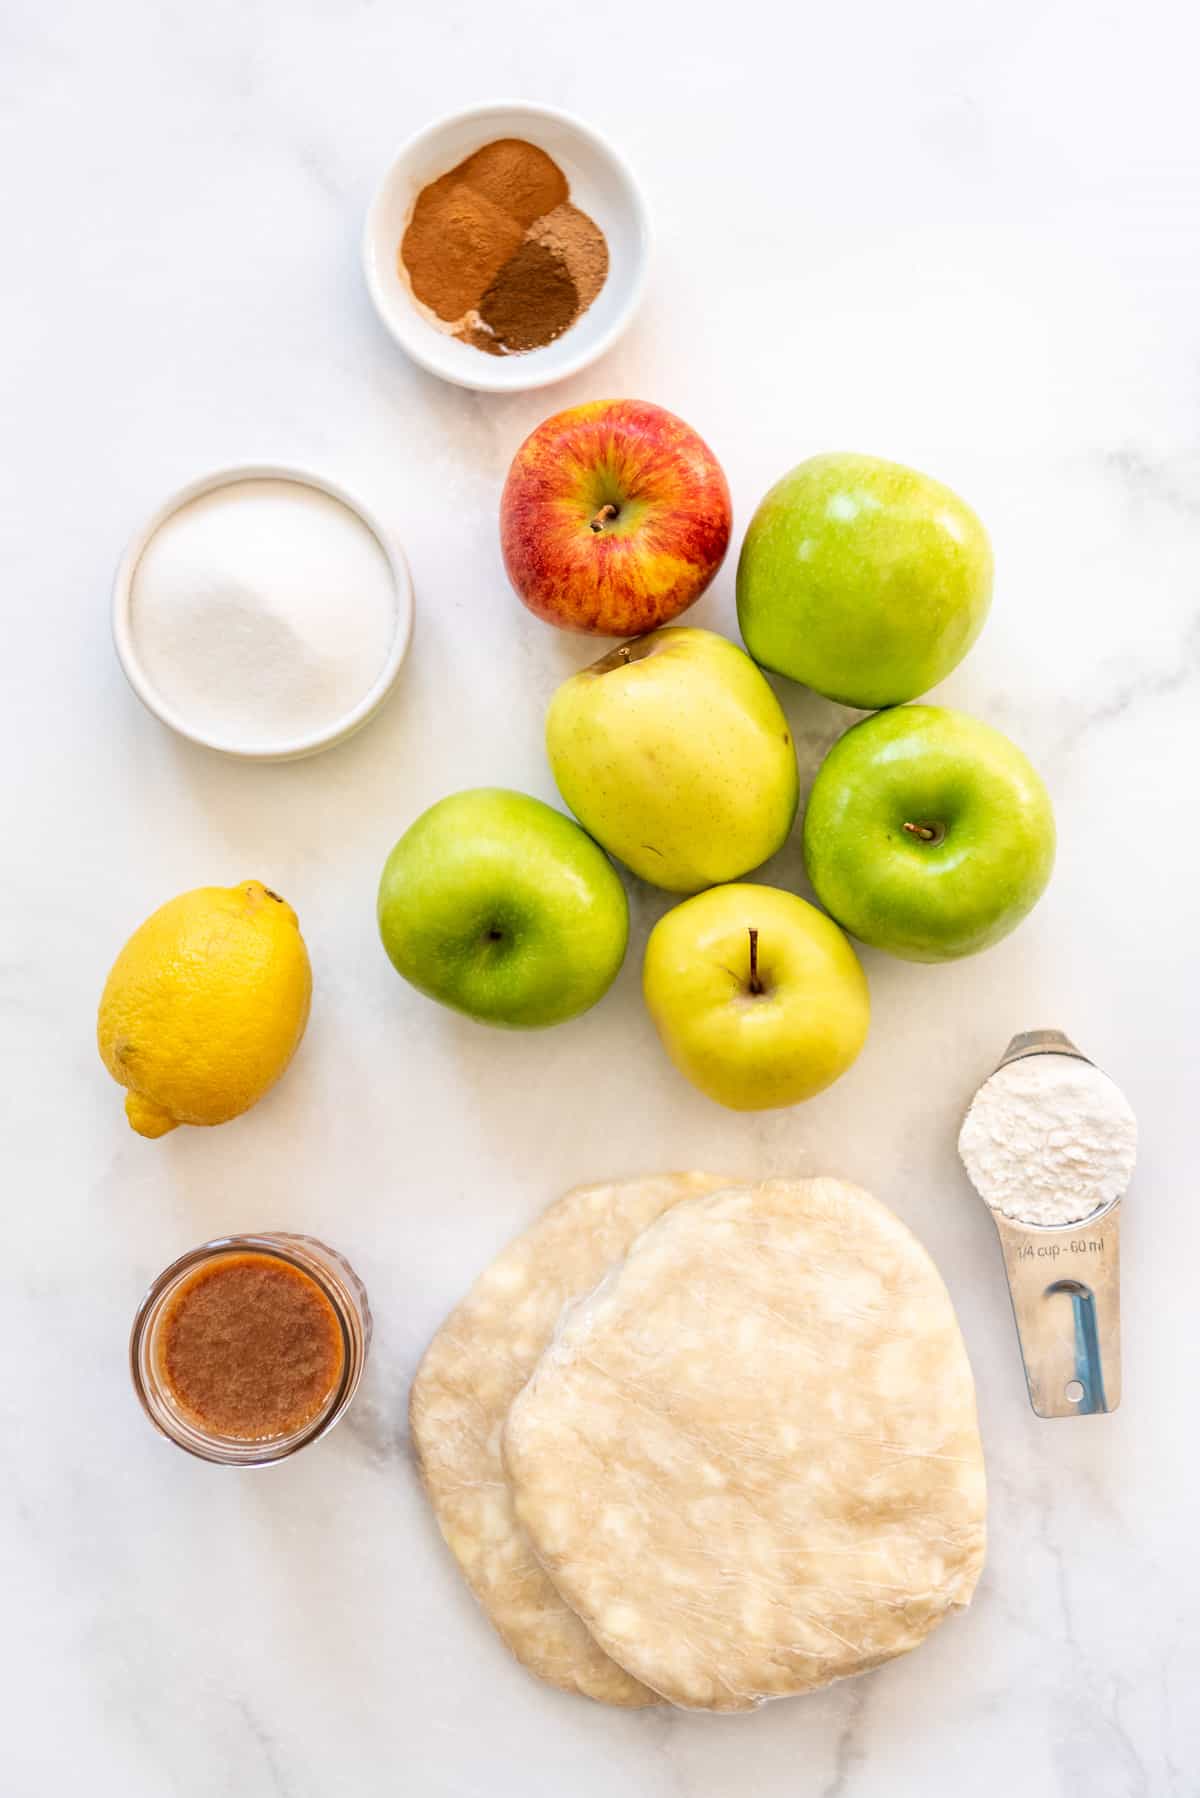 Ingredients for a caramel apple pie.